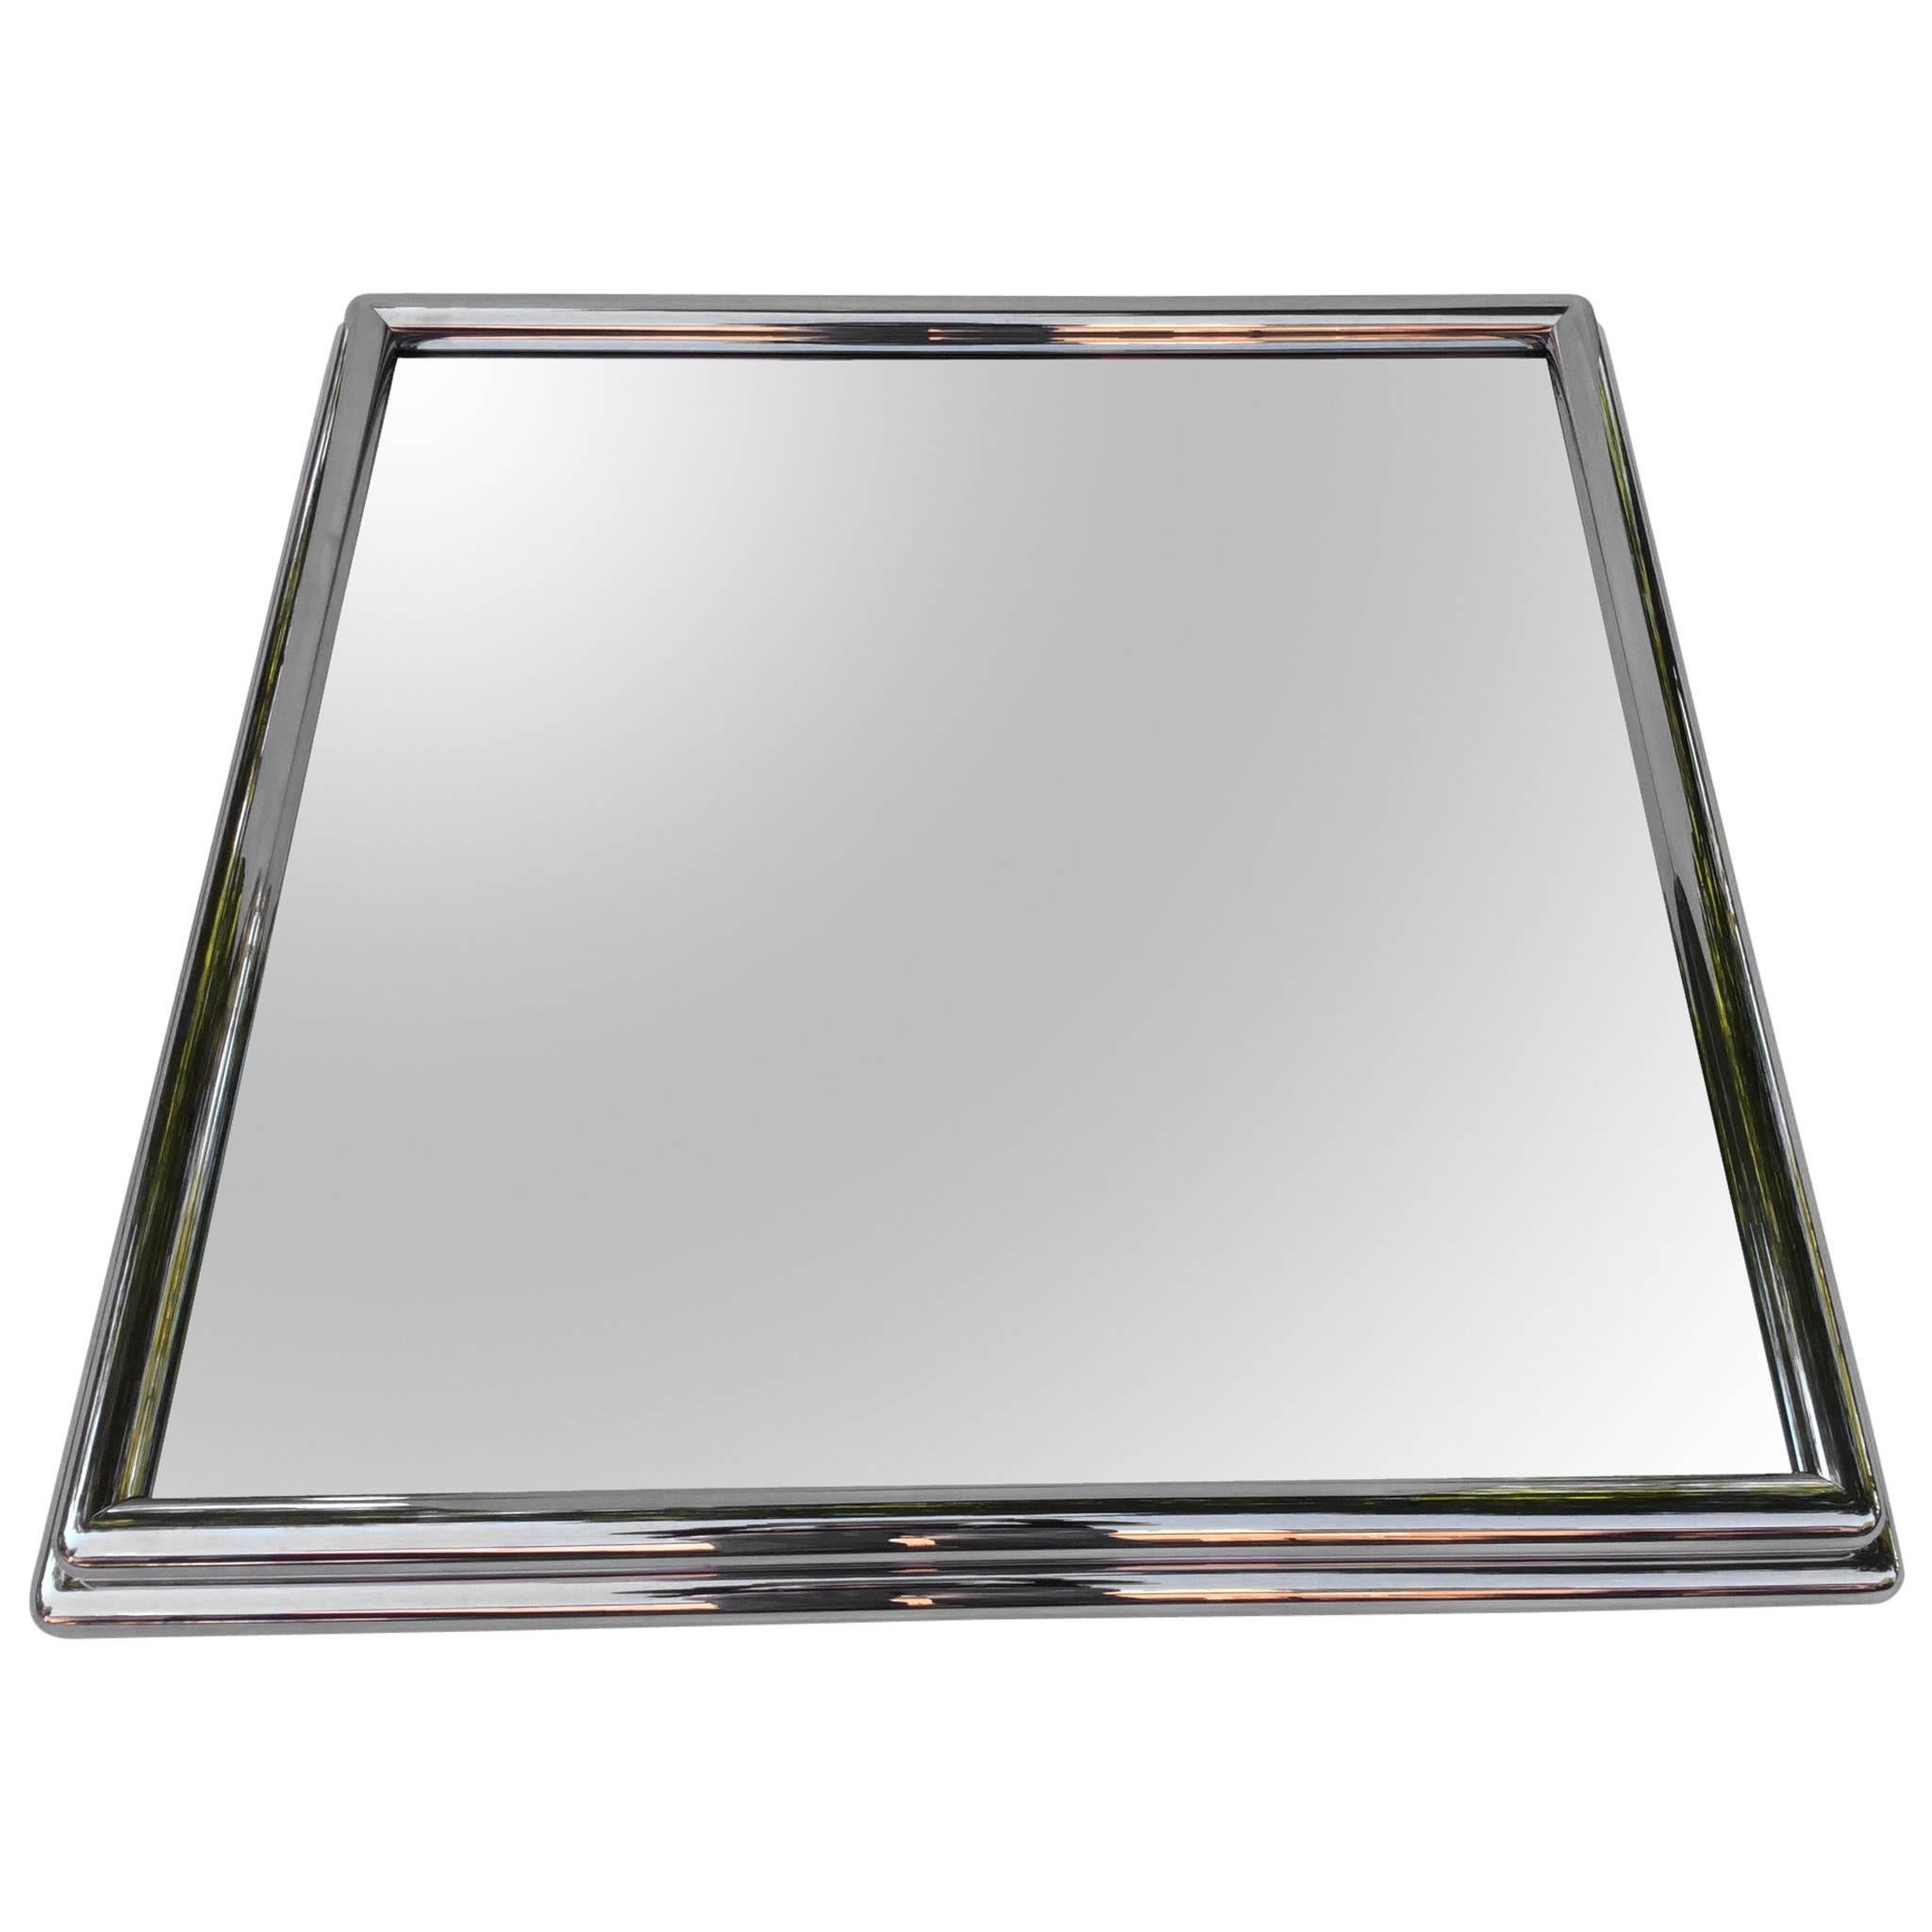 Polished Stainless Steel Radiator Wall Mirror For Sale